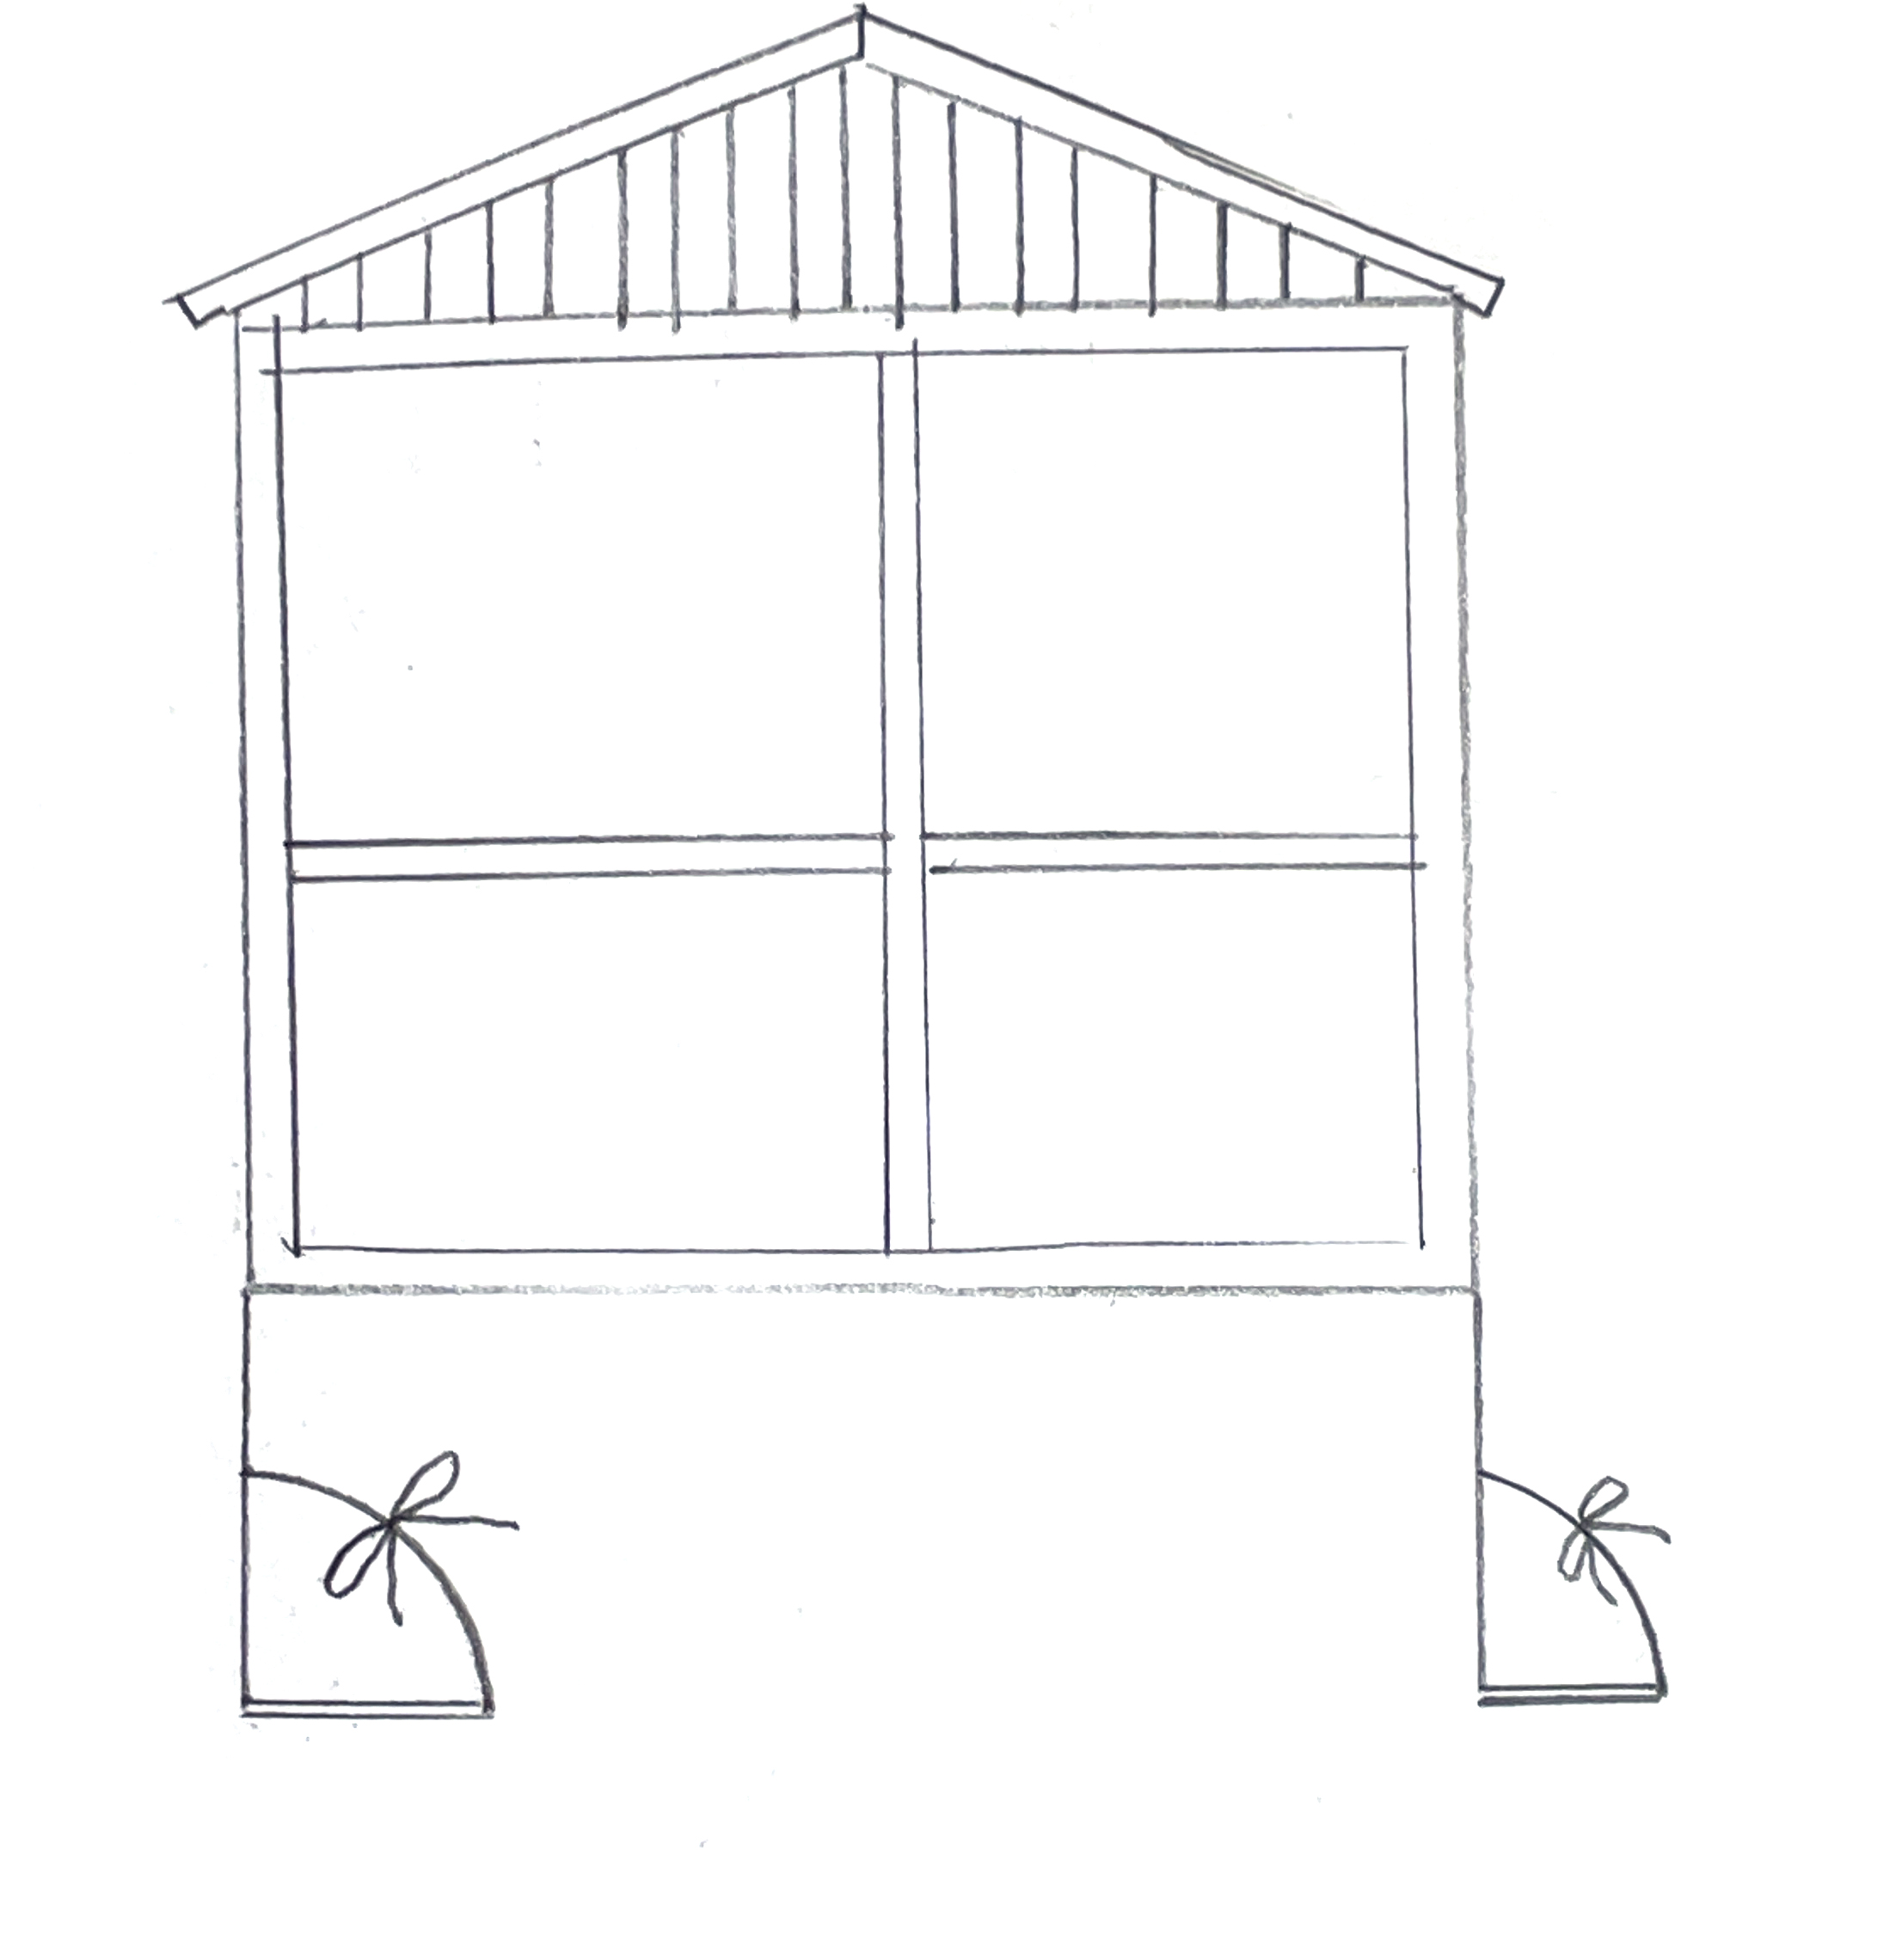 pencil drawing of a window with a roof and two skinny legs with sneakers